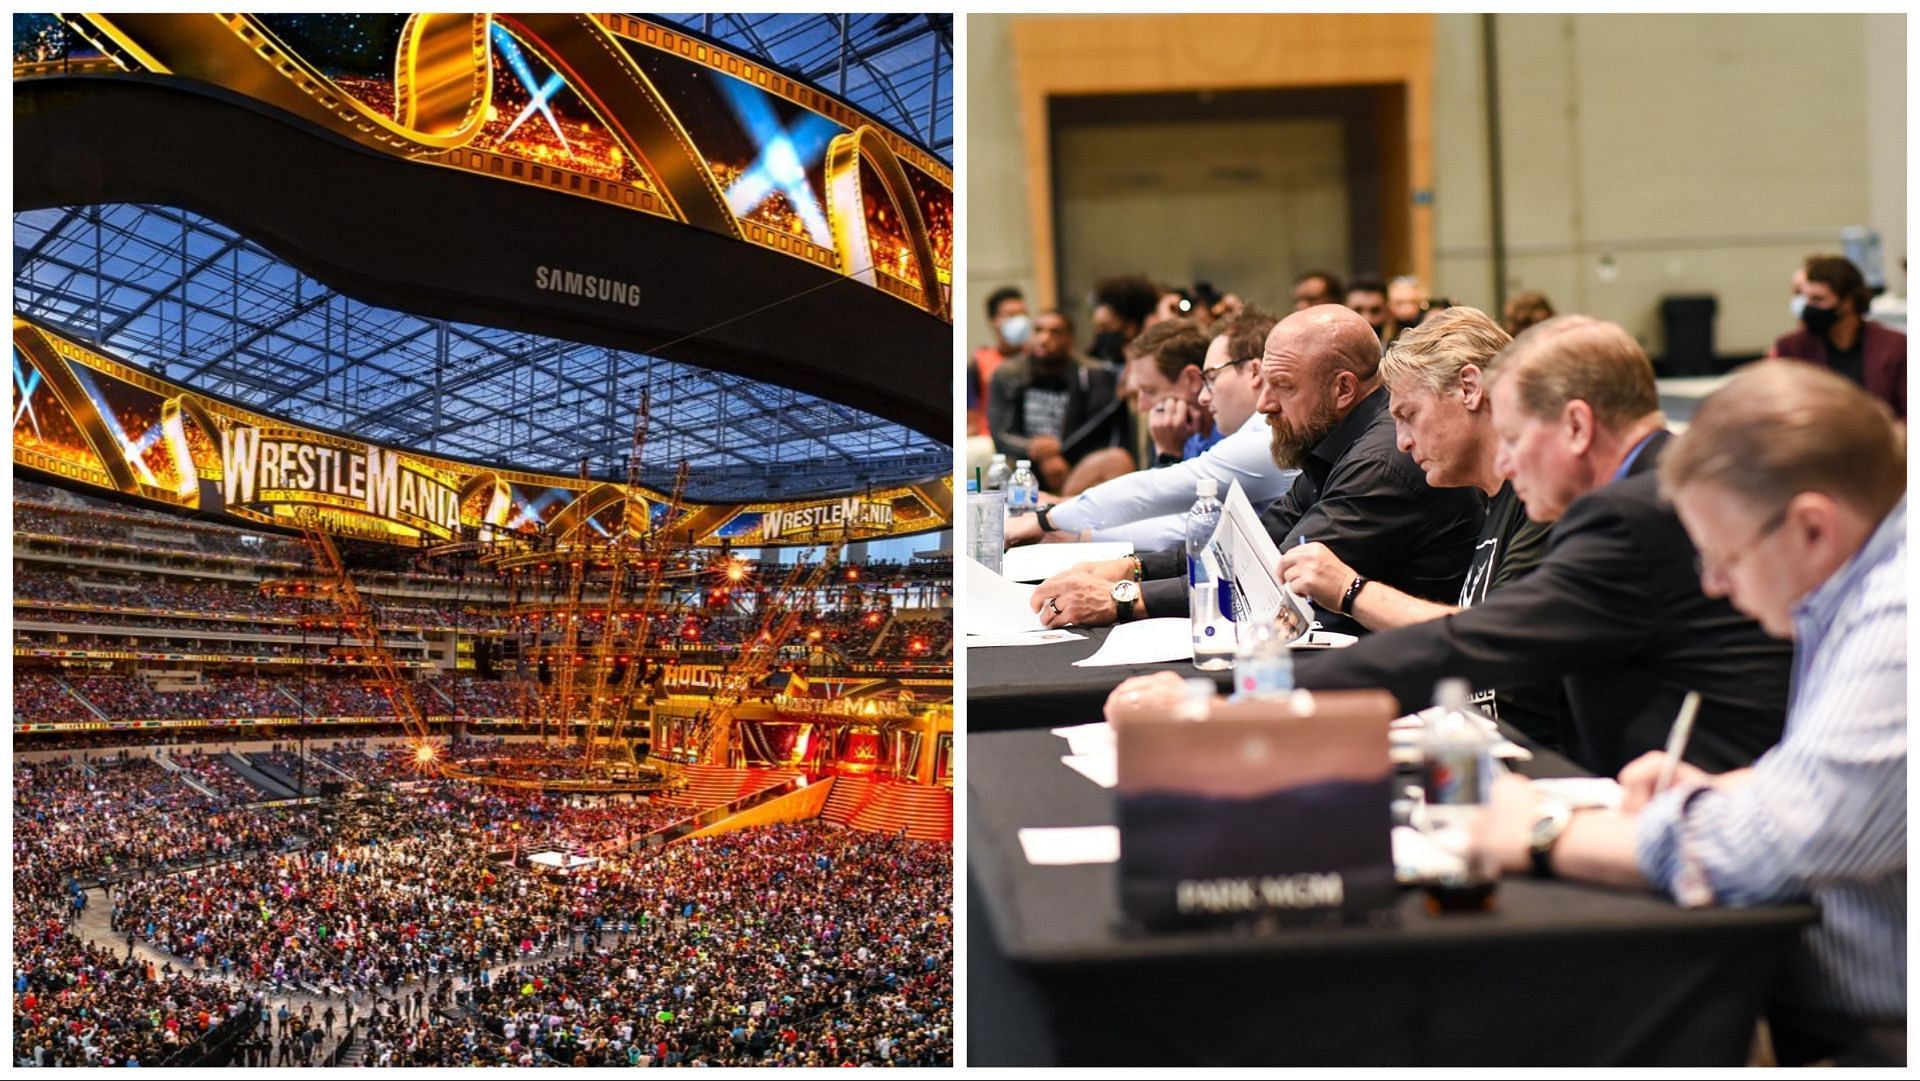 So-Fi Stadium packed for WrestleMania 39, Triple H and other WWE officials at a talent tryout